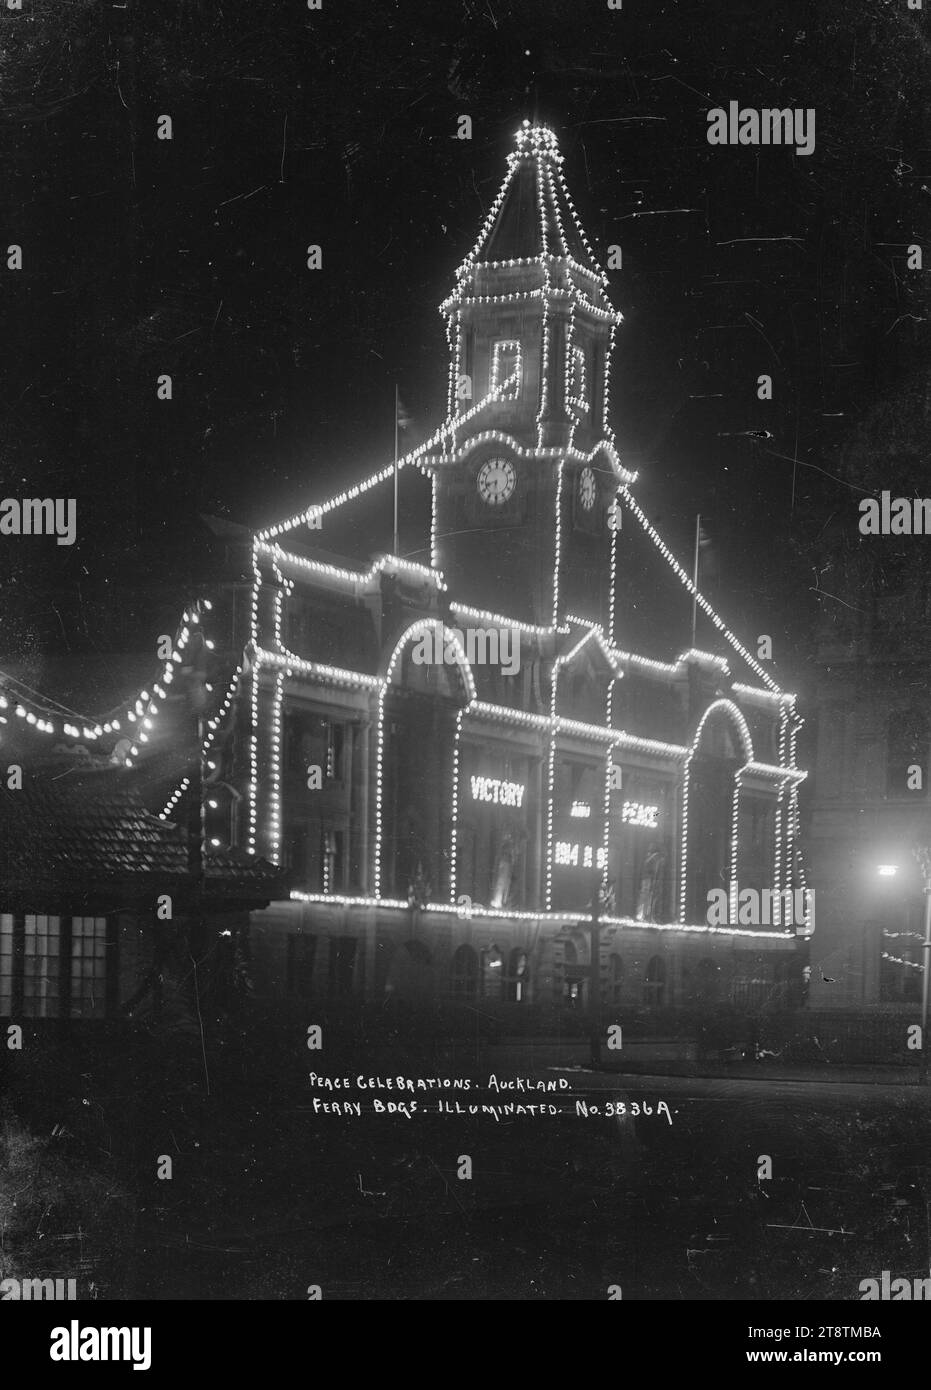 View of Auckland, New Zealand Ferry Building taken at night to show the Peace celebration illuminations, View of Auckland, New Zealand Ferry Building taken at night from the south side (front facade) showing the illuminations on the building. `Victory and Peace 1914 .. indecipherable' have been spelt out with lights on the front together with additional lights which outline the architectural features of the building. The illuminations were installed to celebrate the end of World War One Stock Photo